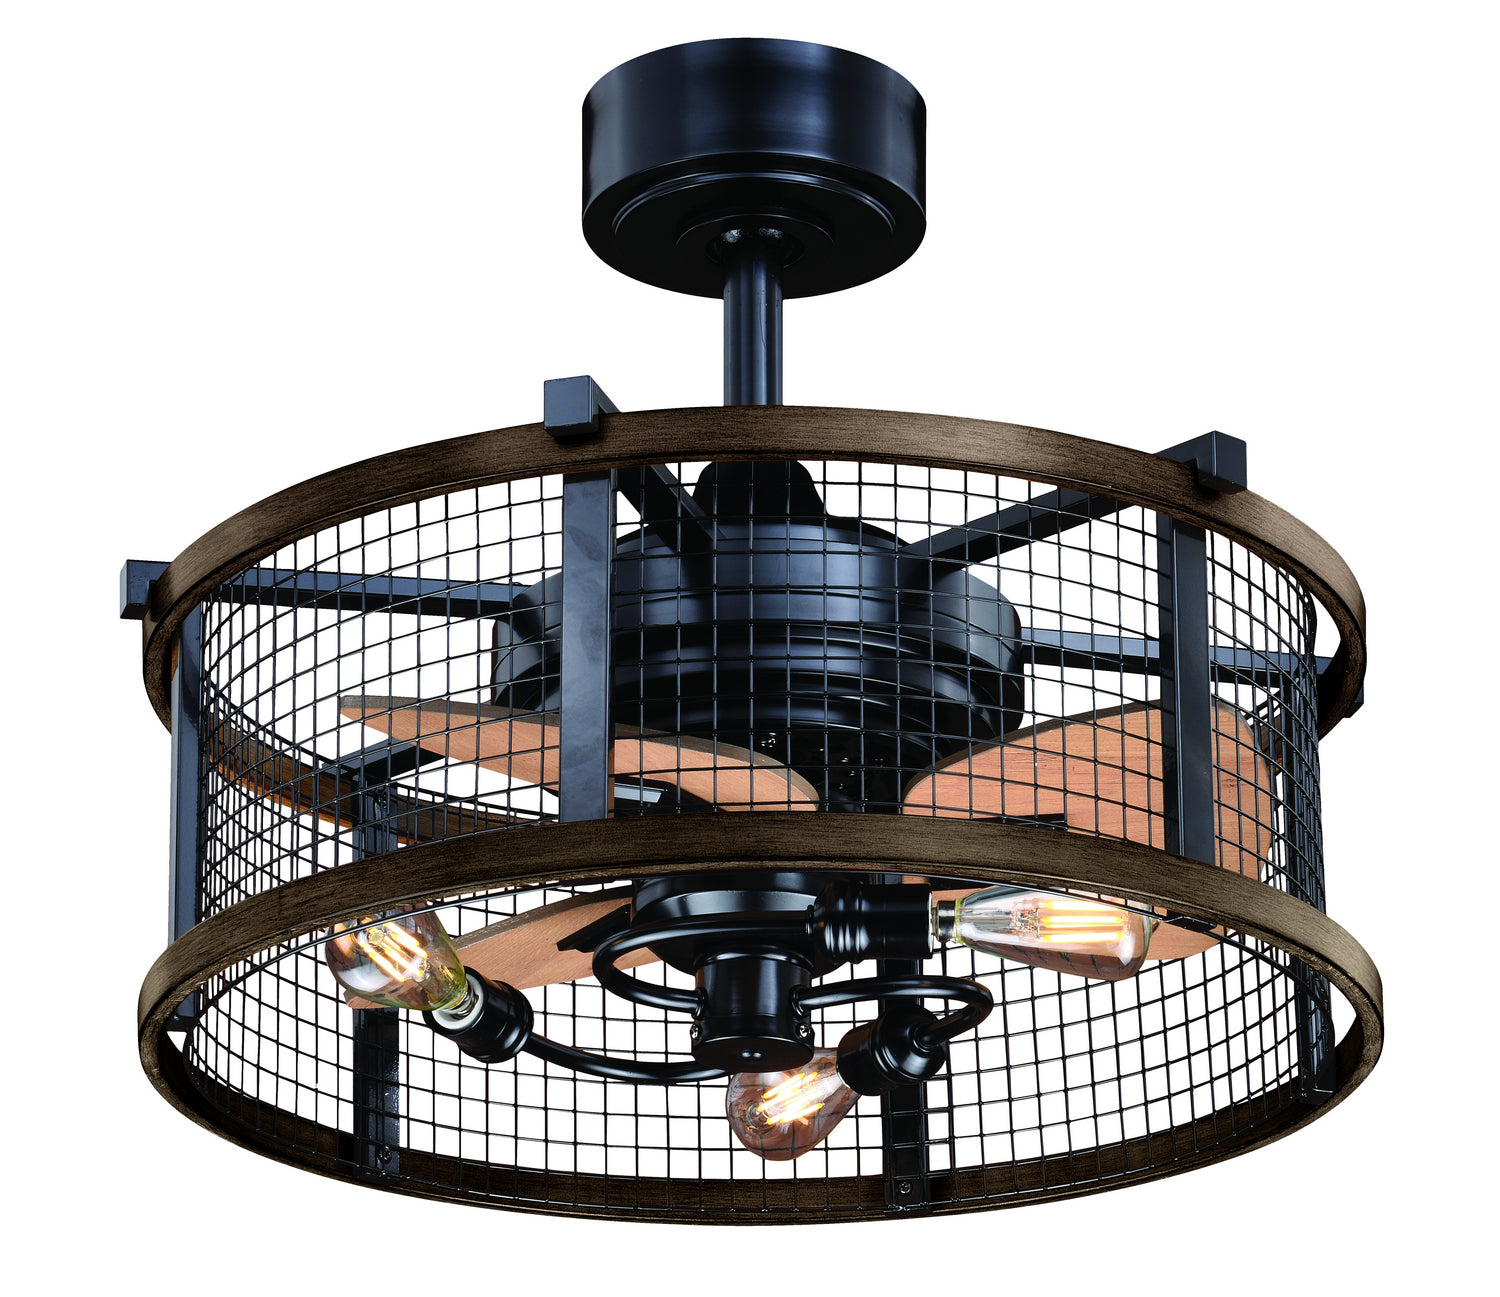 Vaxcel Humboldt F0061 Ceiling Fan - Oil Rubbed Bronze and Burnished Teak, Anigre/